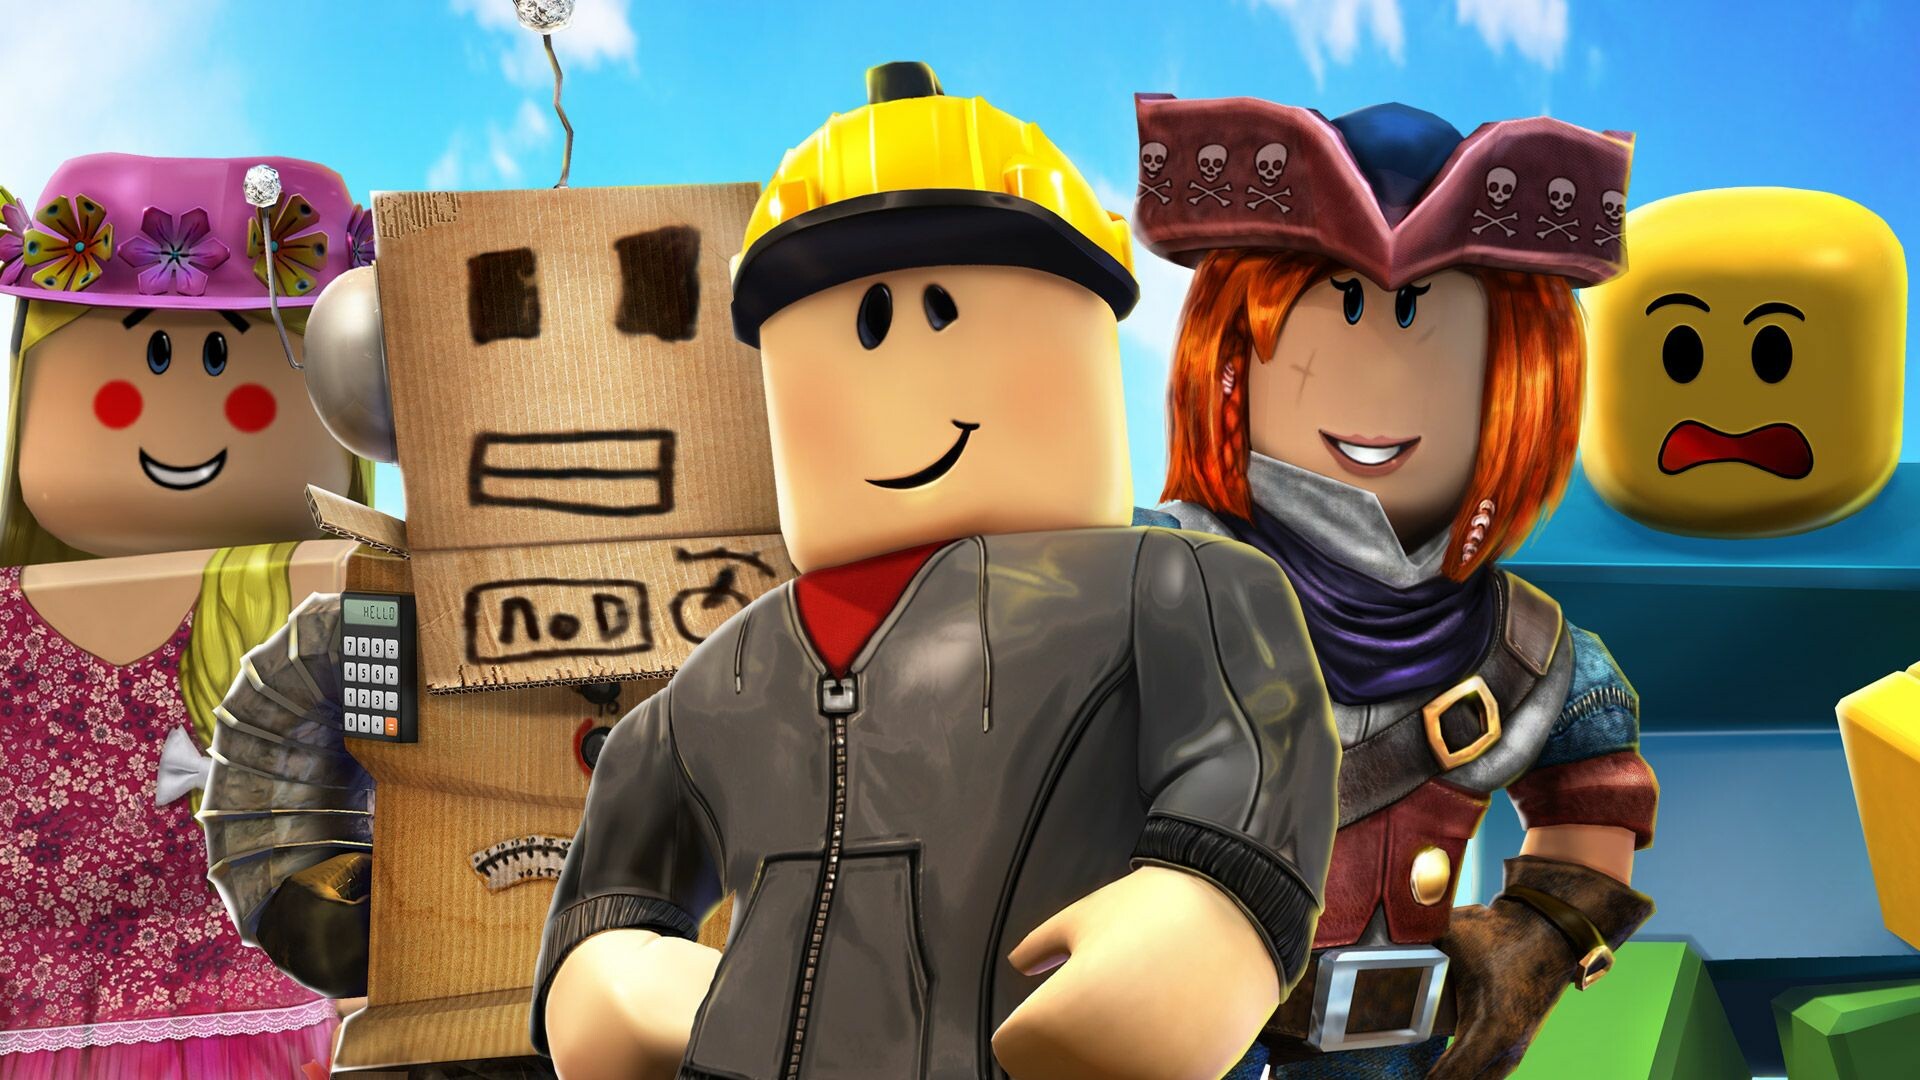 Roblox: Players use a virtual toolbox to create their own games using proprietary building system. 1920x1080 Full HD Wallpaper.